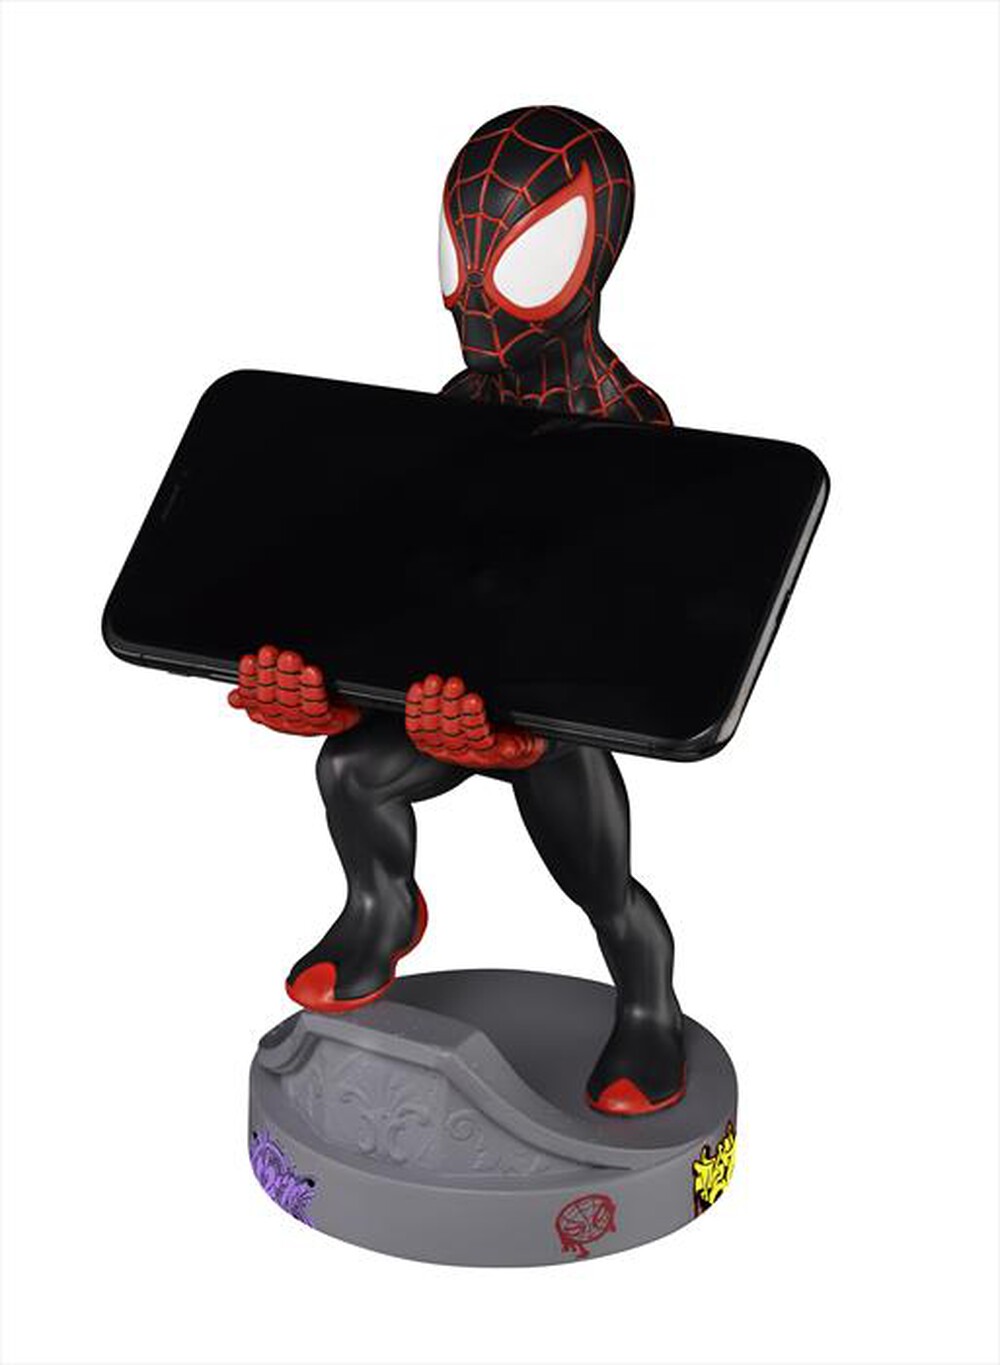 "EXQUISITE GAMING - MILES MORALES SPIDERMAN CABLE GUY- FULL FIGURE"